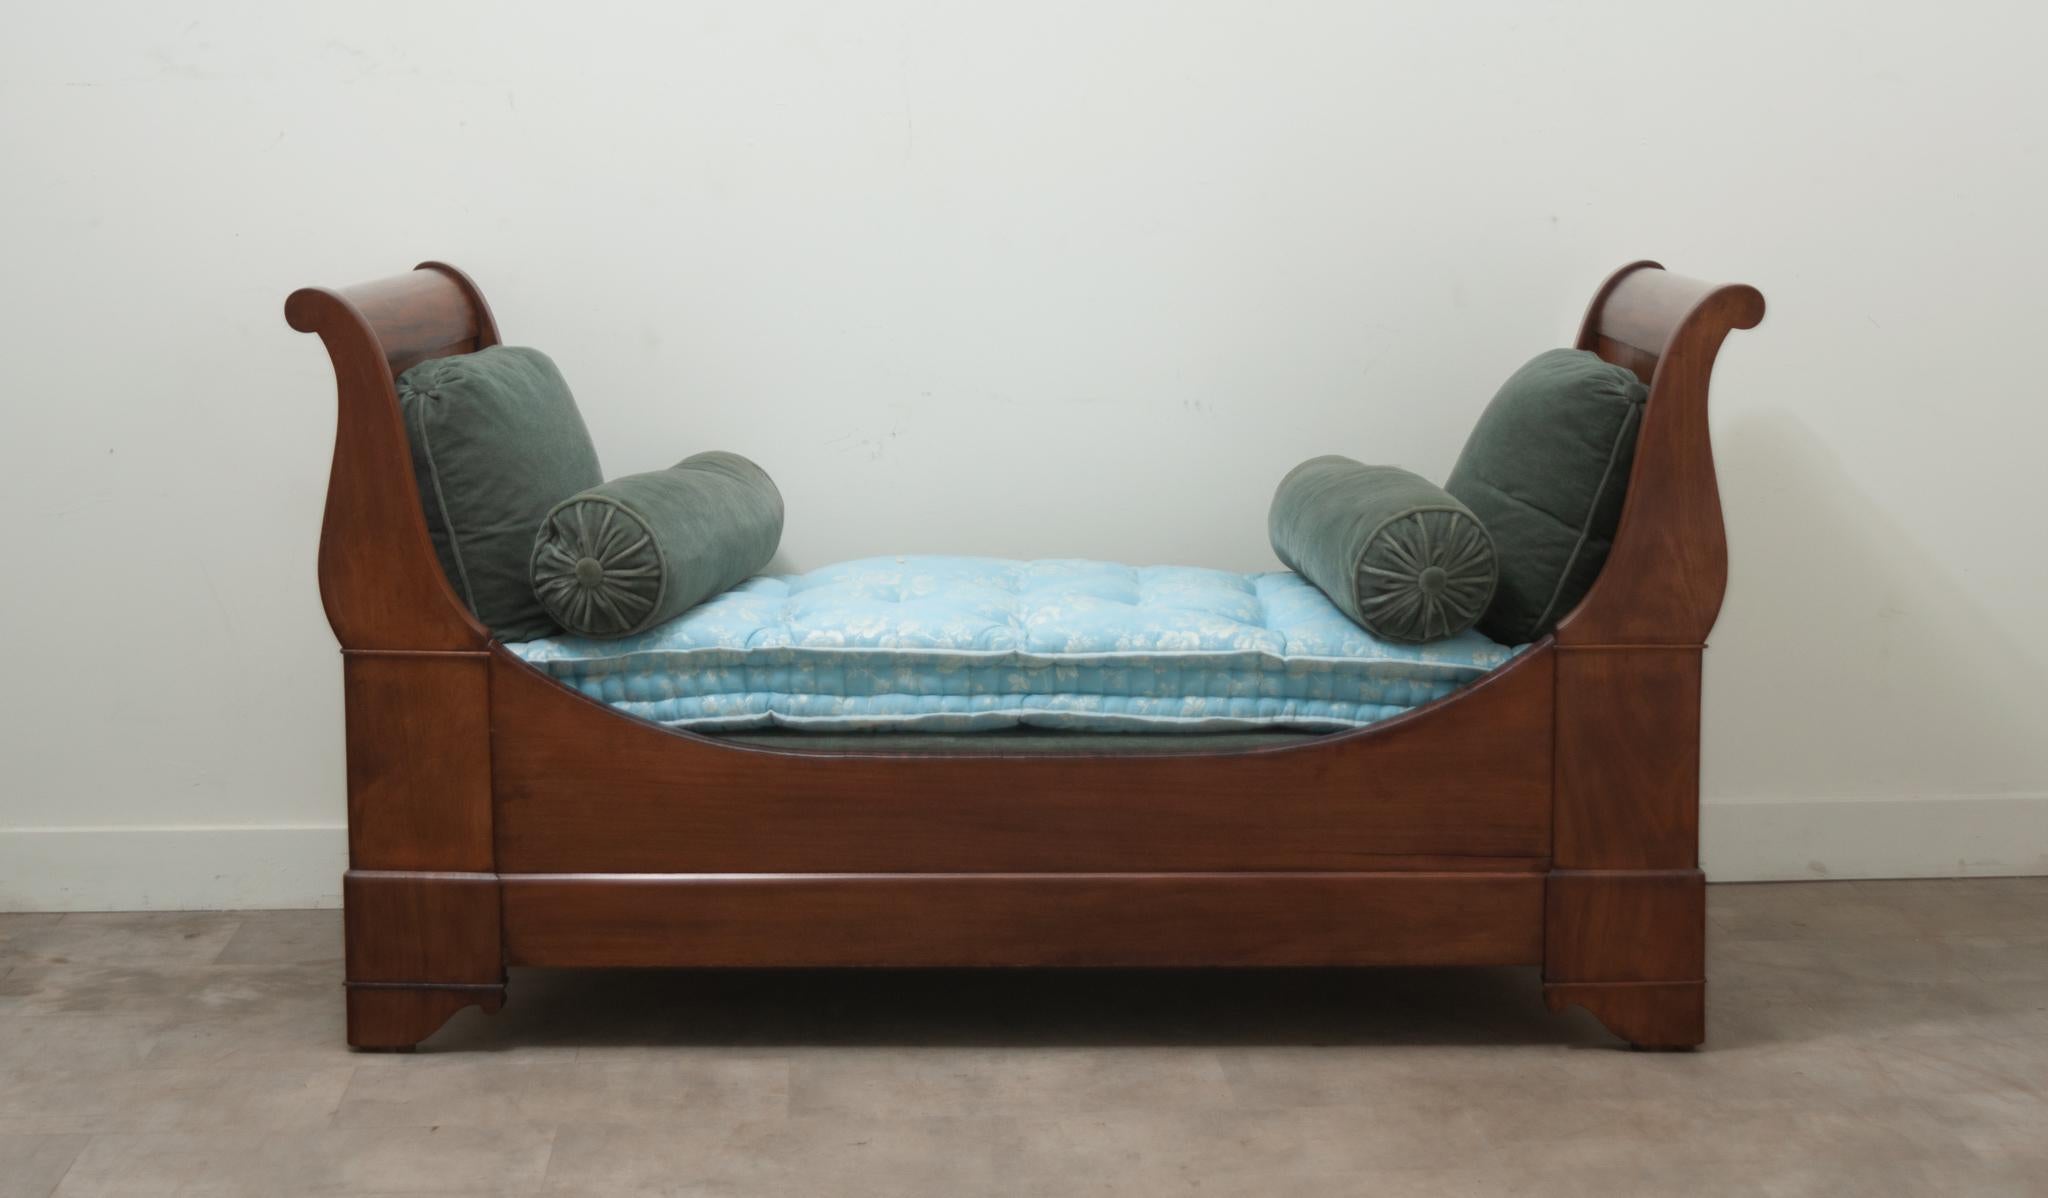 This classic French sleigh bed is the perfect daybed for additional seating or sleeping. The mahogany bed frame comes with a custom fitted box spring, mattress, and set of four pillows. The bed rails attach to the headboard and footboard with steel